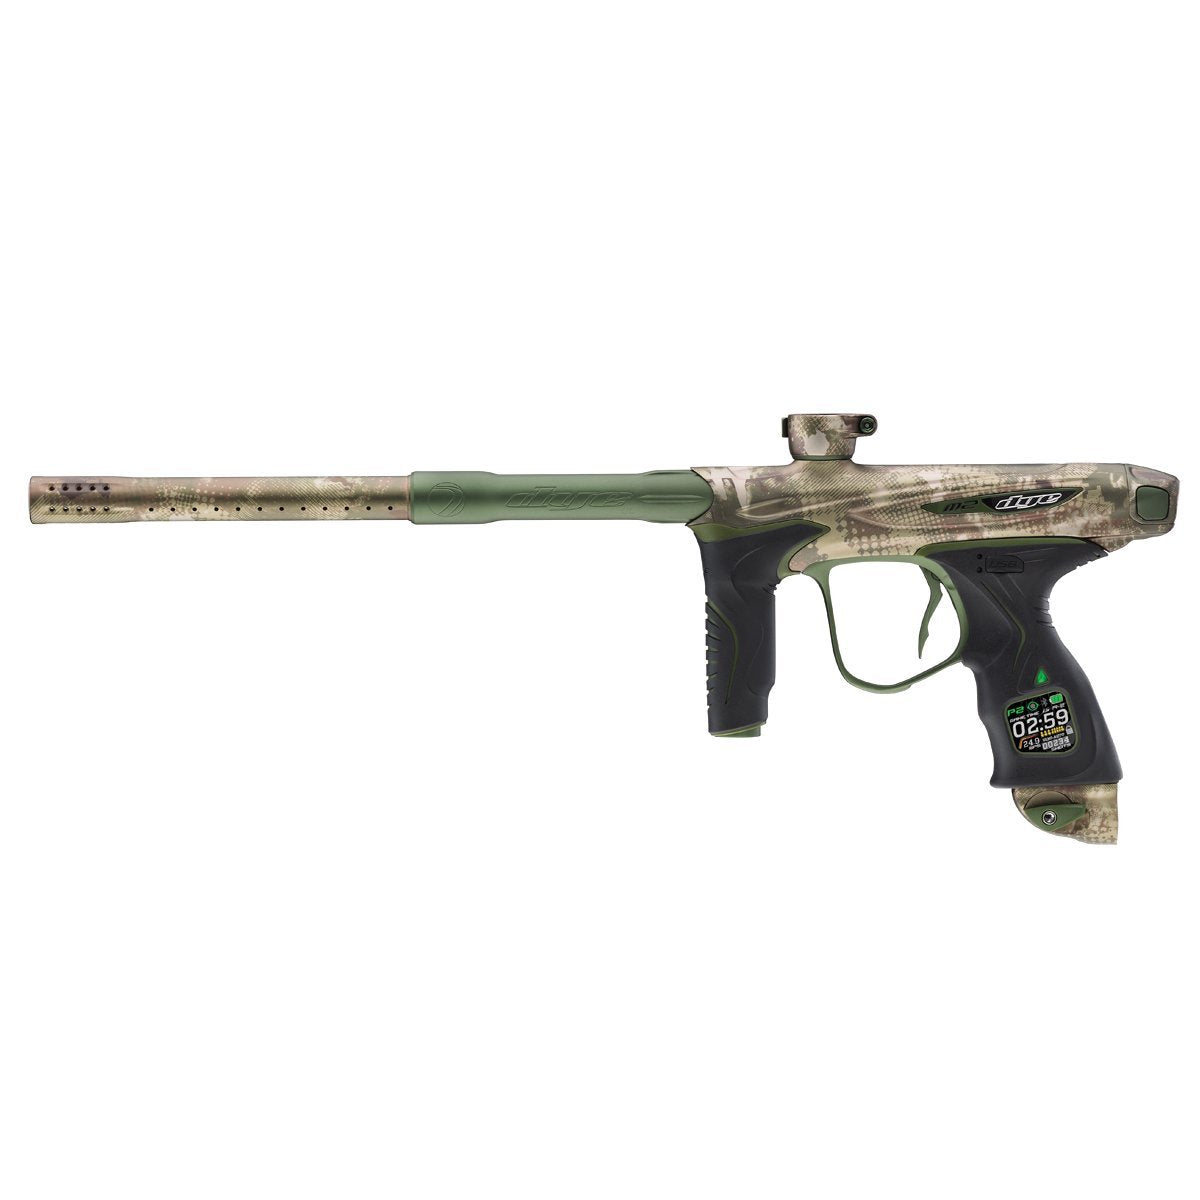 Dye M2 with MOSAir Paintball Marker - LE DyeCam - DYE